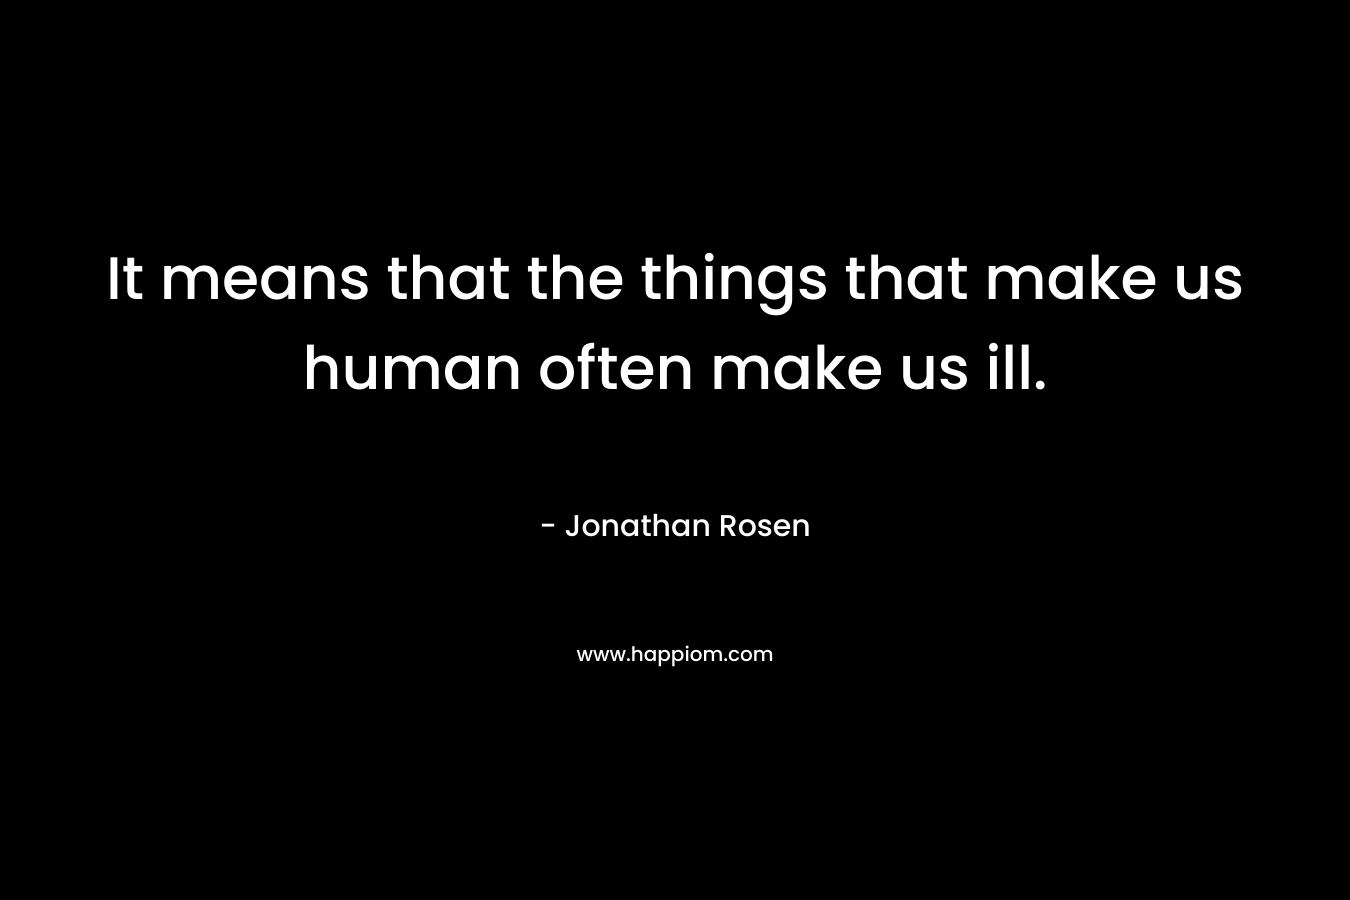 It means that the things that make us human often make us ill. – Jonathan Rosen